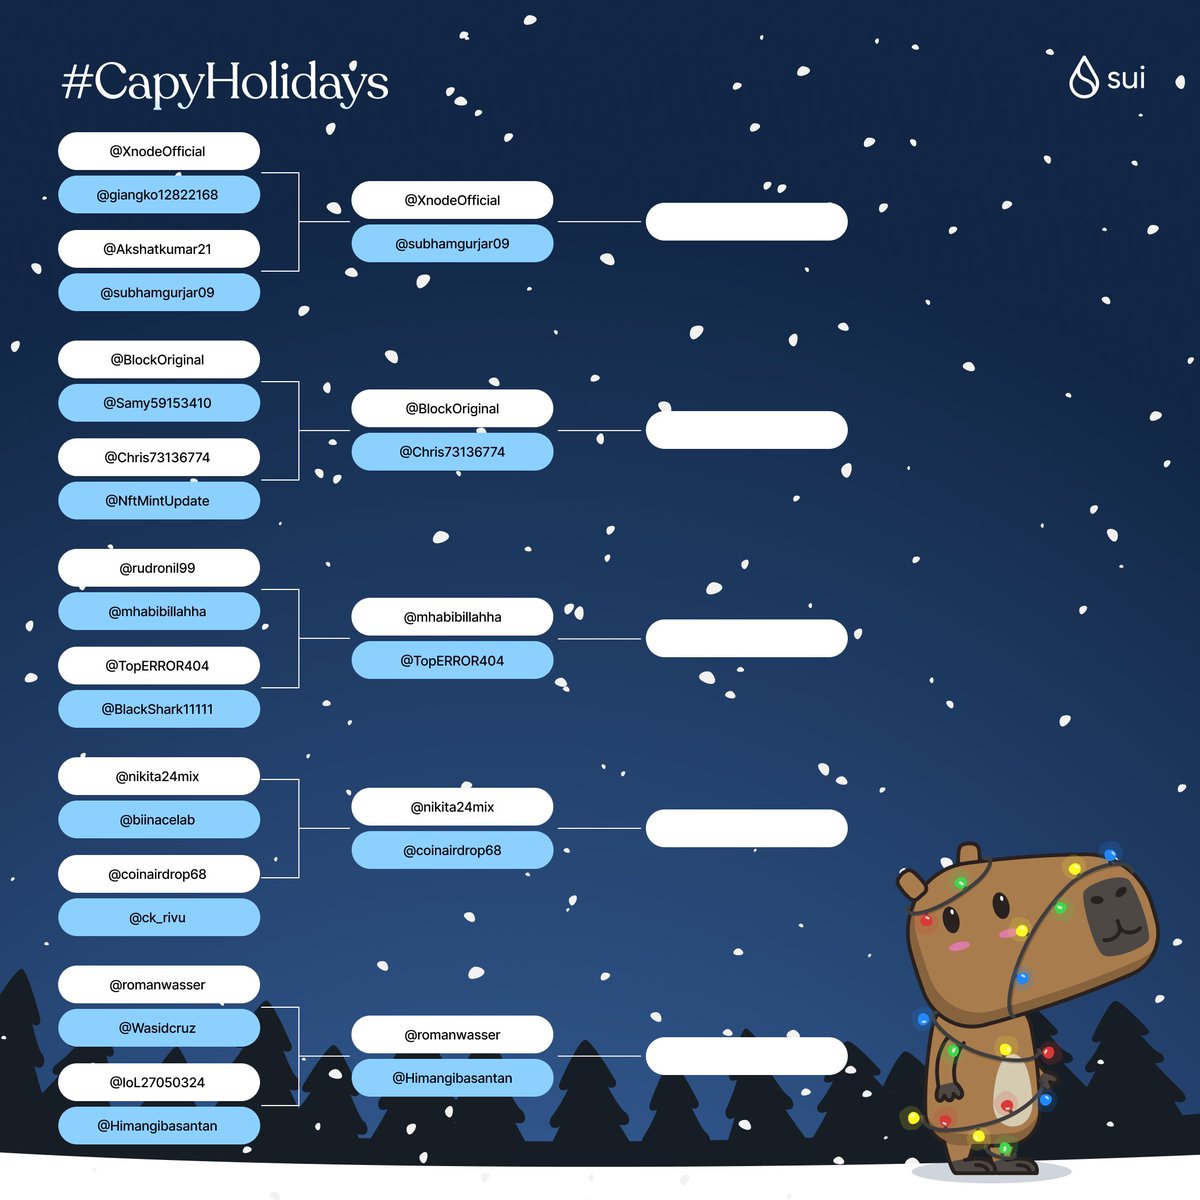 🌊And we're in the final round of the #CapyHolidays bracket!

🗳️Vote for your favorite Capys below to determine the winners: